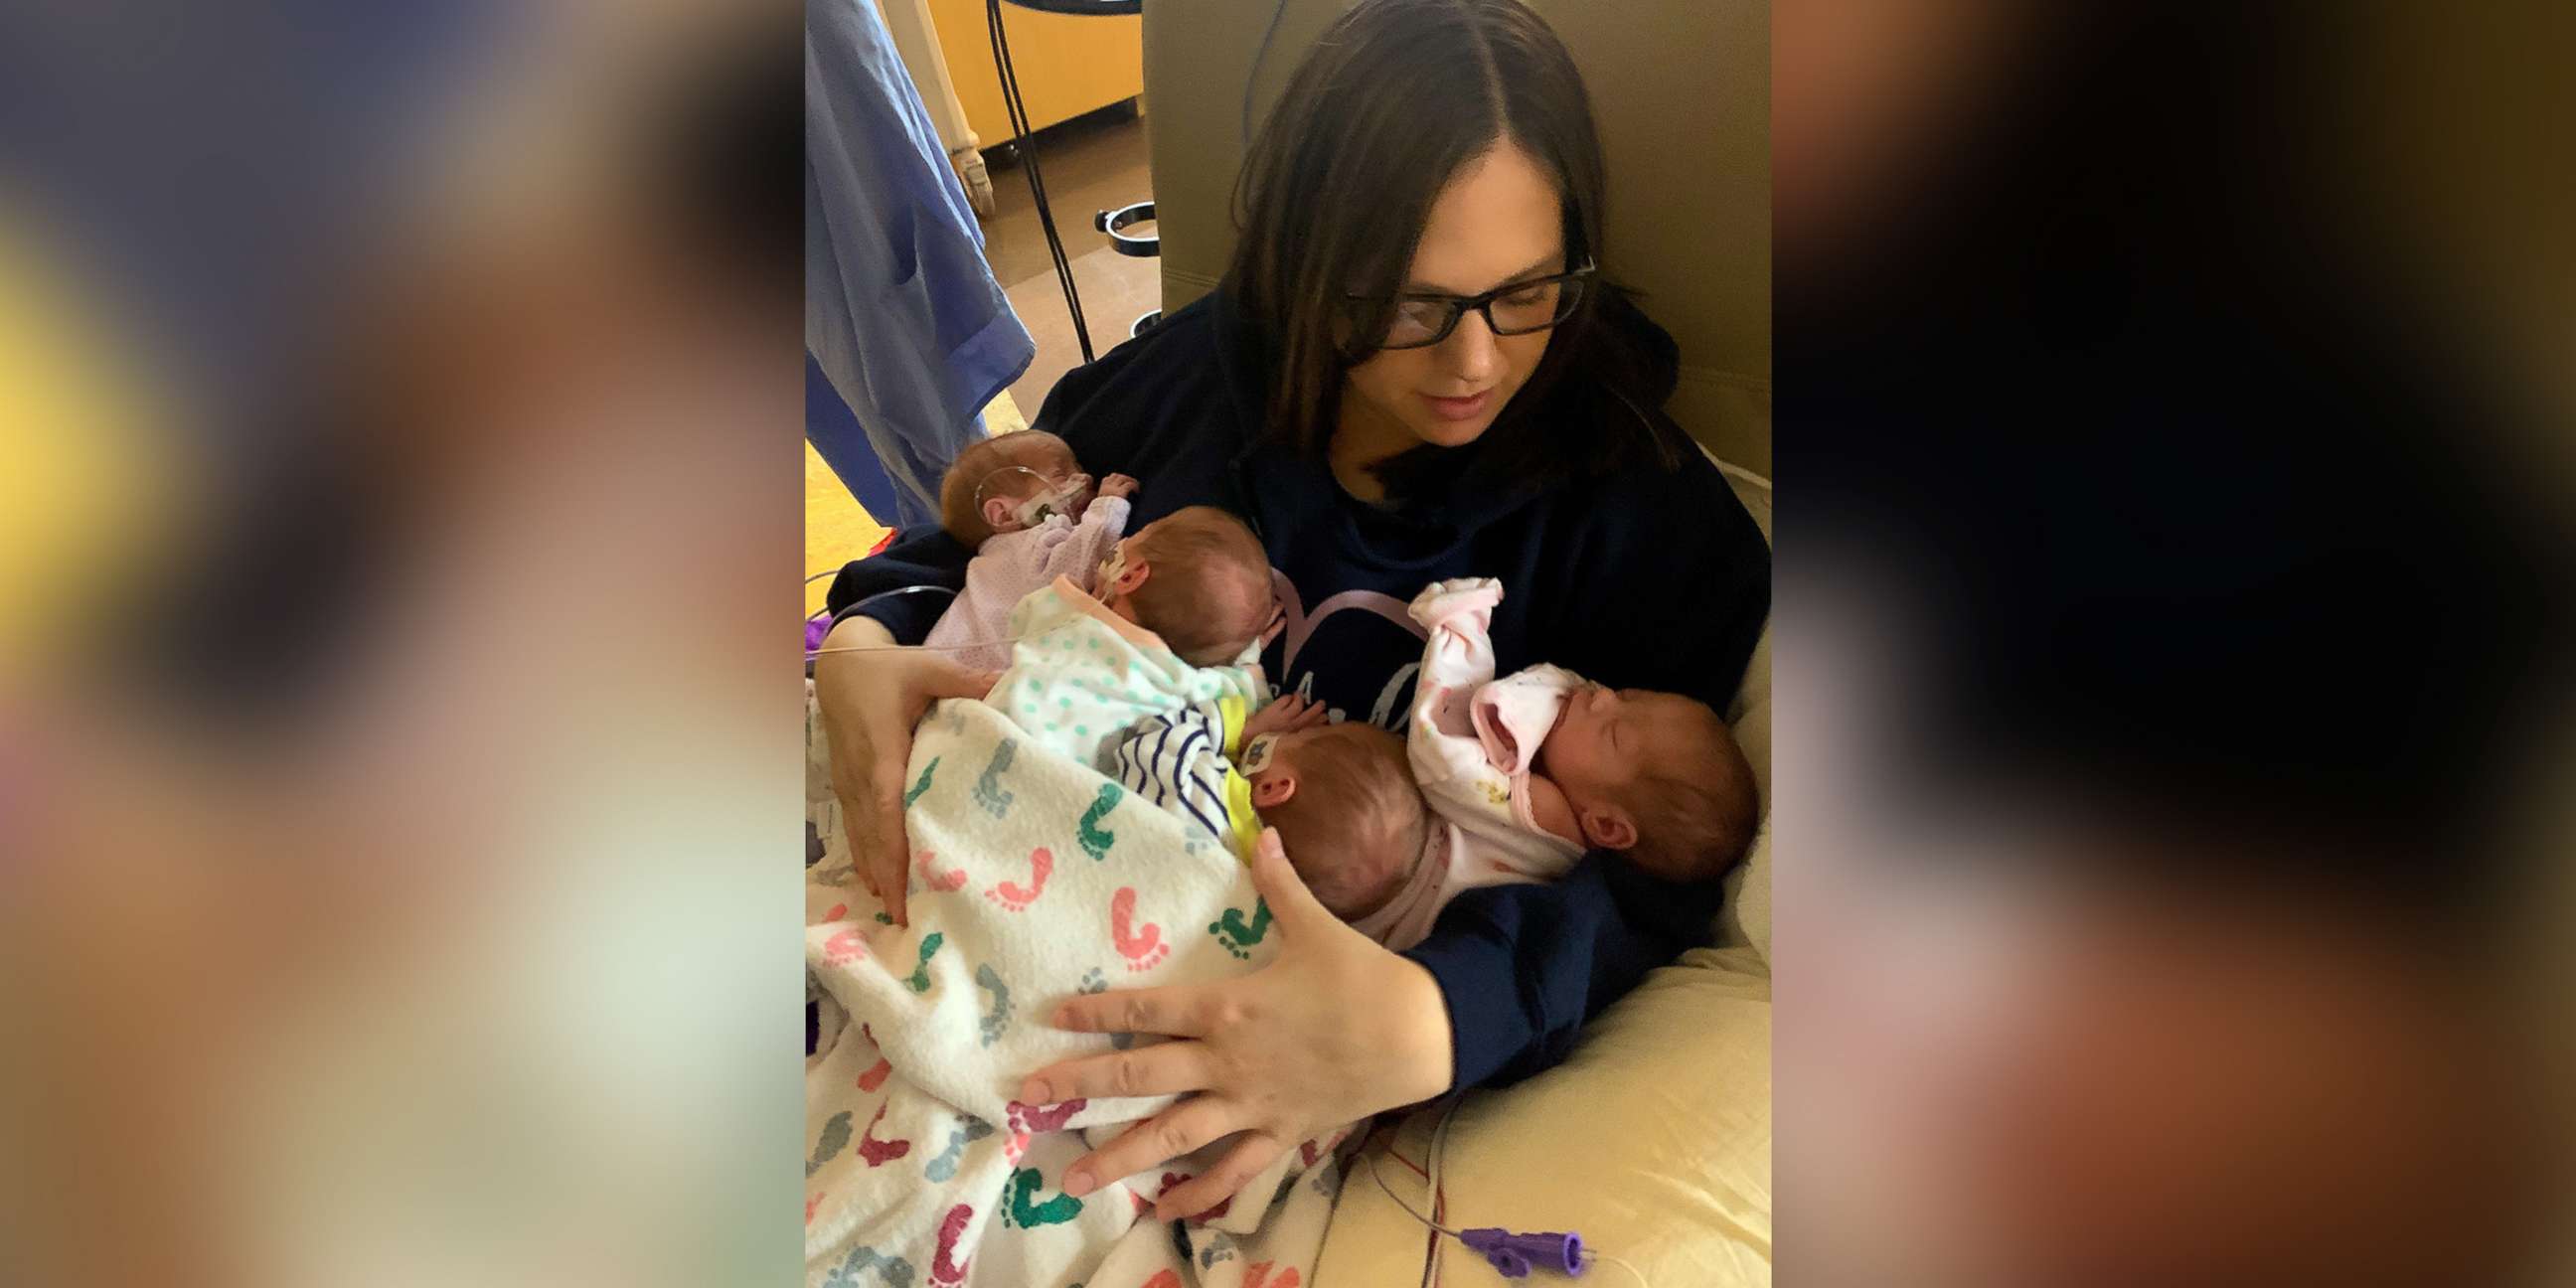 PHOTO: Taylor Becher, of Minnesota, holds her identical quadruplet daughters who were born on March 11, 2020.